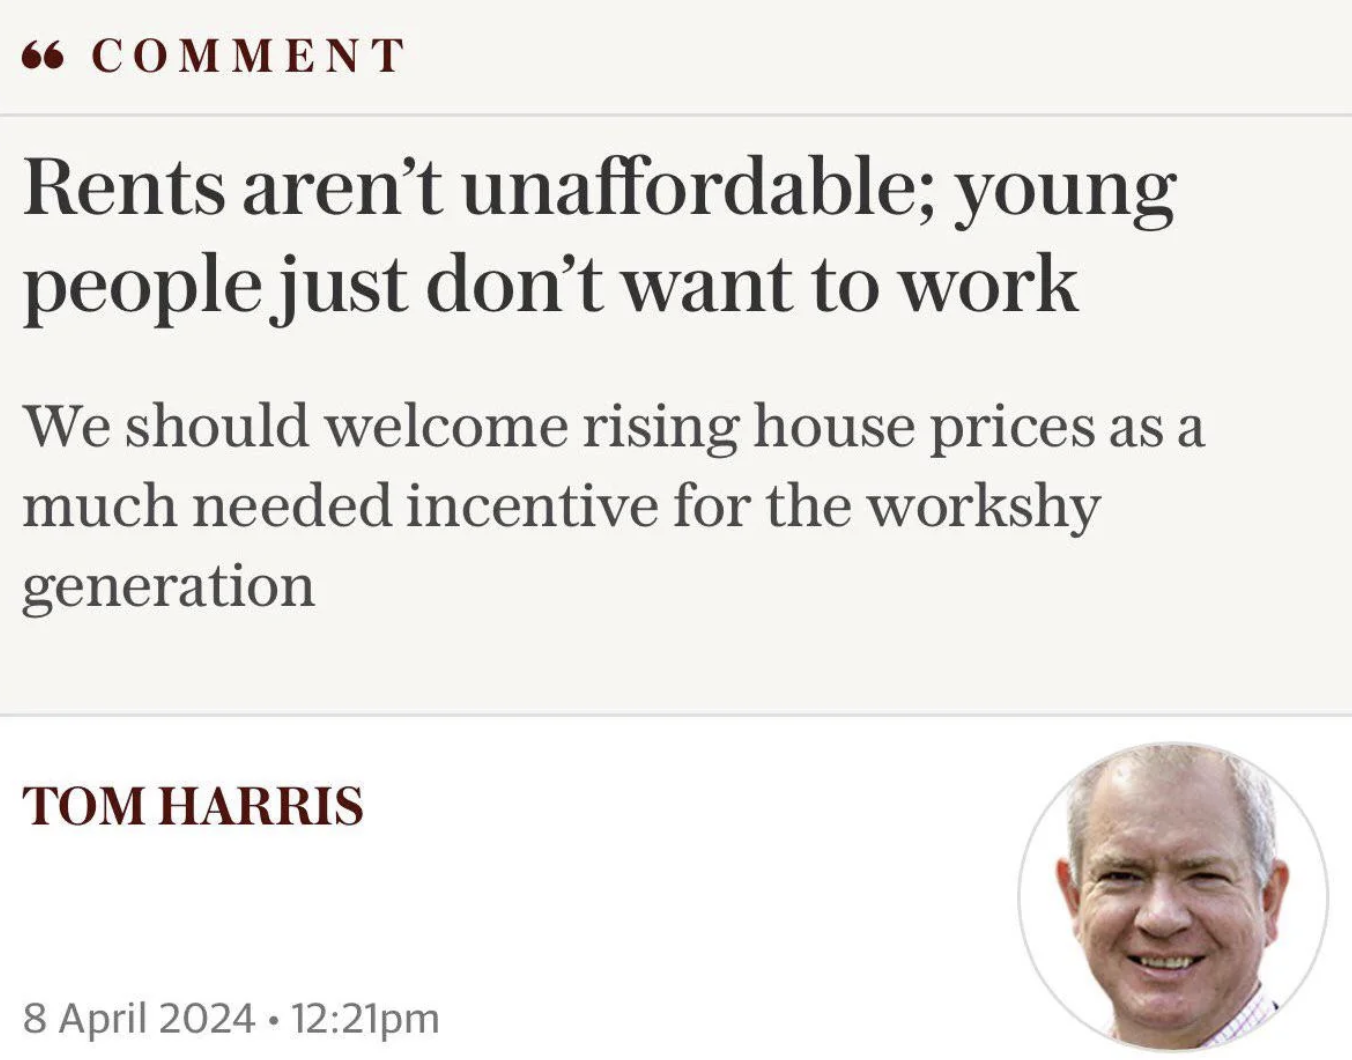 Rent - 66 Comment Rents aren't unaffordable; young people just don't want to work We should welcome rising house prices as a much needed incentive for the workshy generation Tom Harris pm